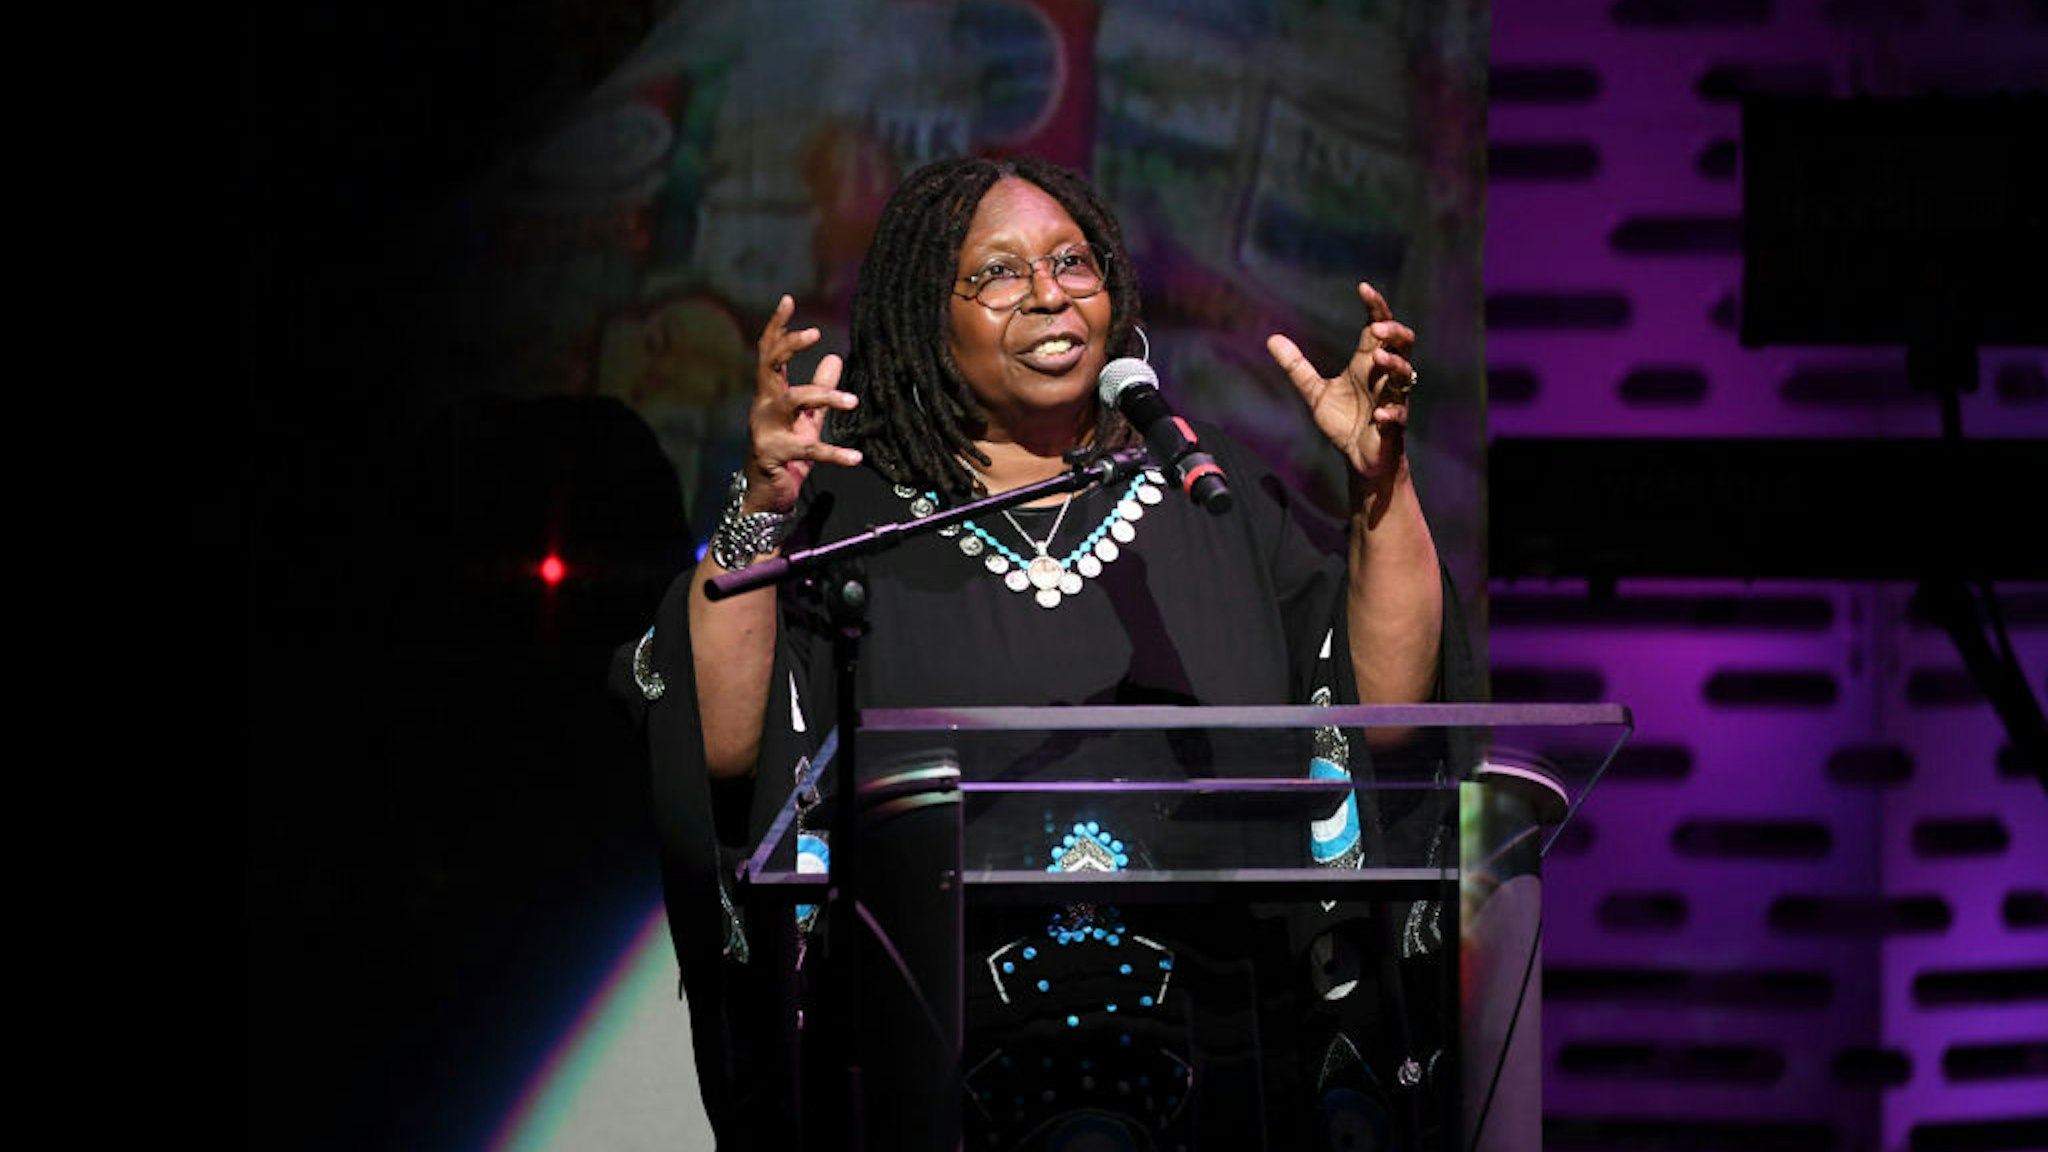 NEW YORK, NEW YORK - JUNE 13: Whoopi Goldberg presents an award during the 2022 Apollo Theater Spring Benefit at The Apollo Theater on June 13, 2022 in New York City. (Photo by Shahar Azran/Getty Images)